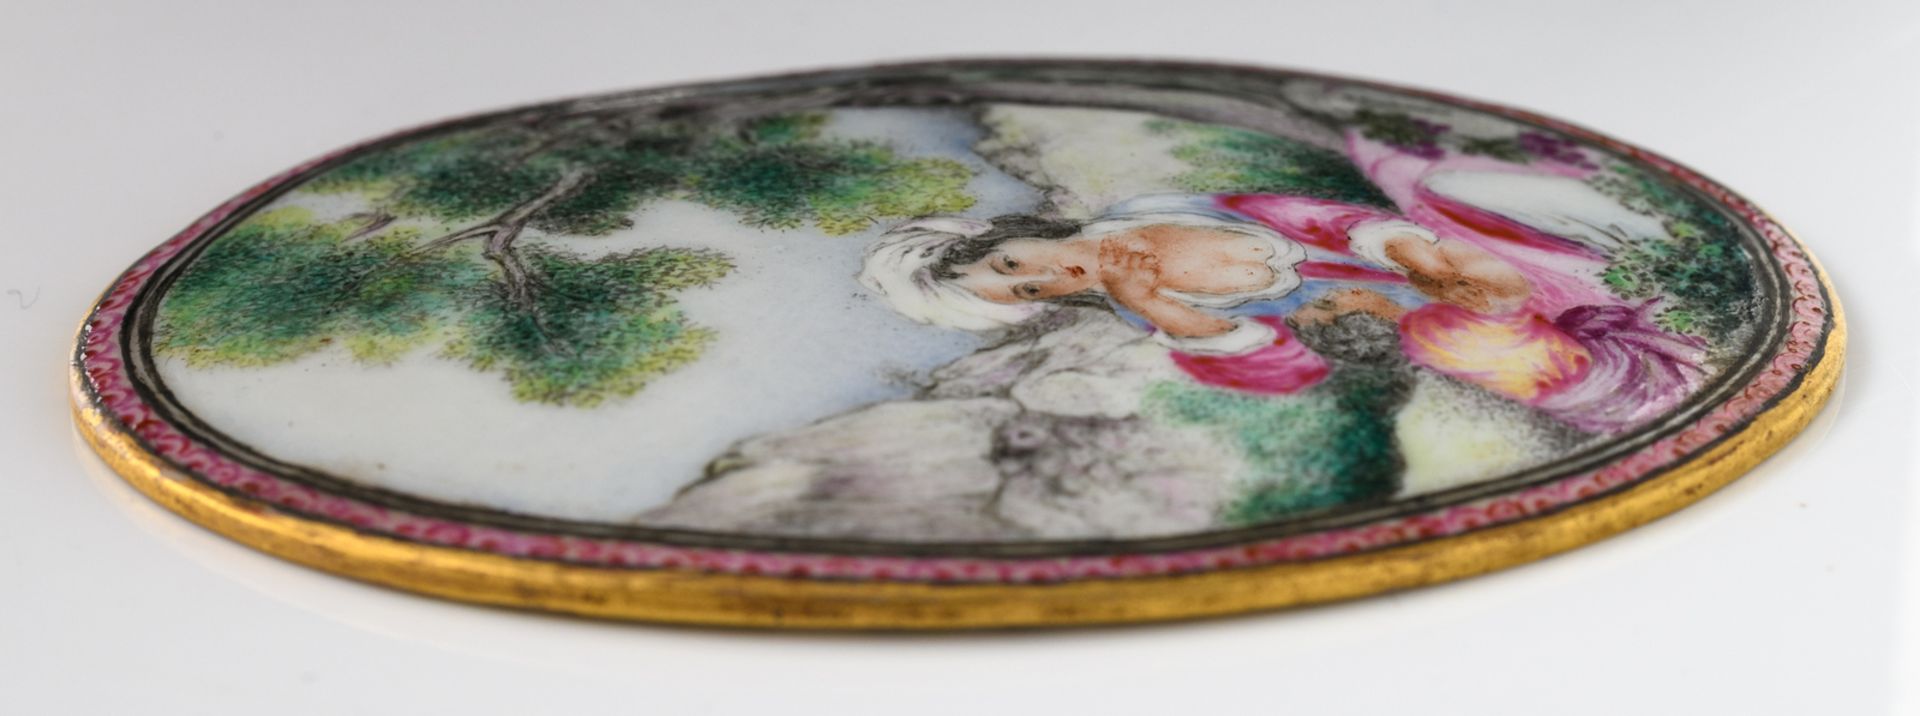 A Chinese famille rose porcelain miniature plaque, export porcelain type, marked, 6,5 x 8,5 cm - Image 3 of 3